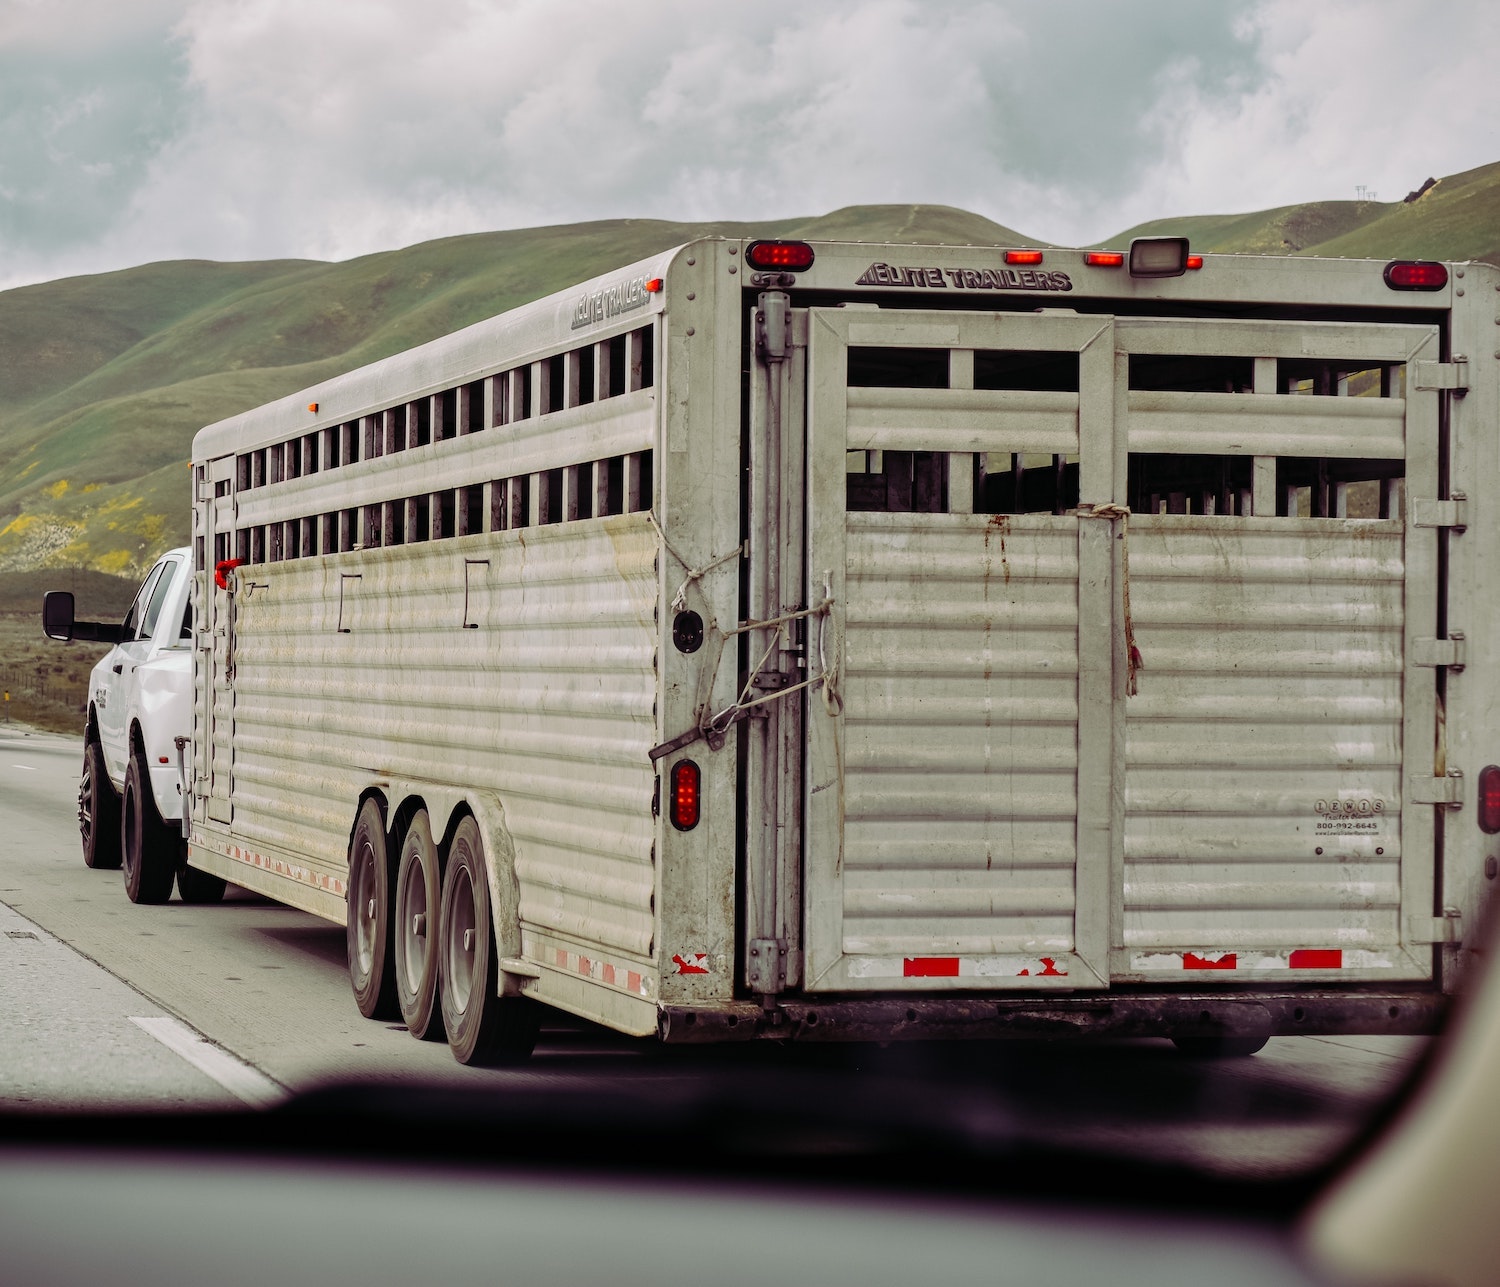 Heavy-duty Ram pickup truck twoing a heavy livestock trailer down the interstate, rolling hills visible in the background.